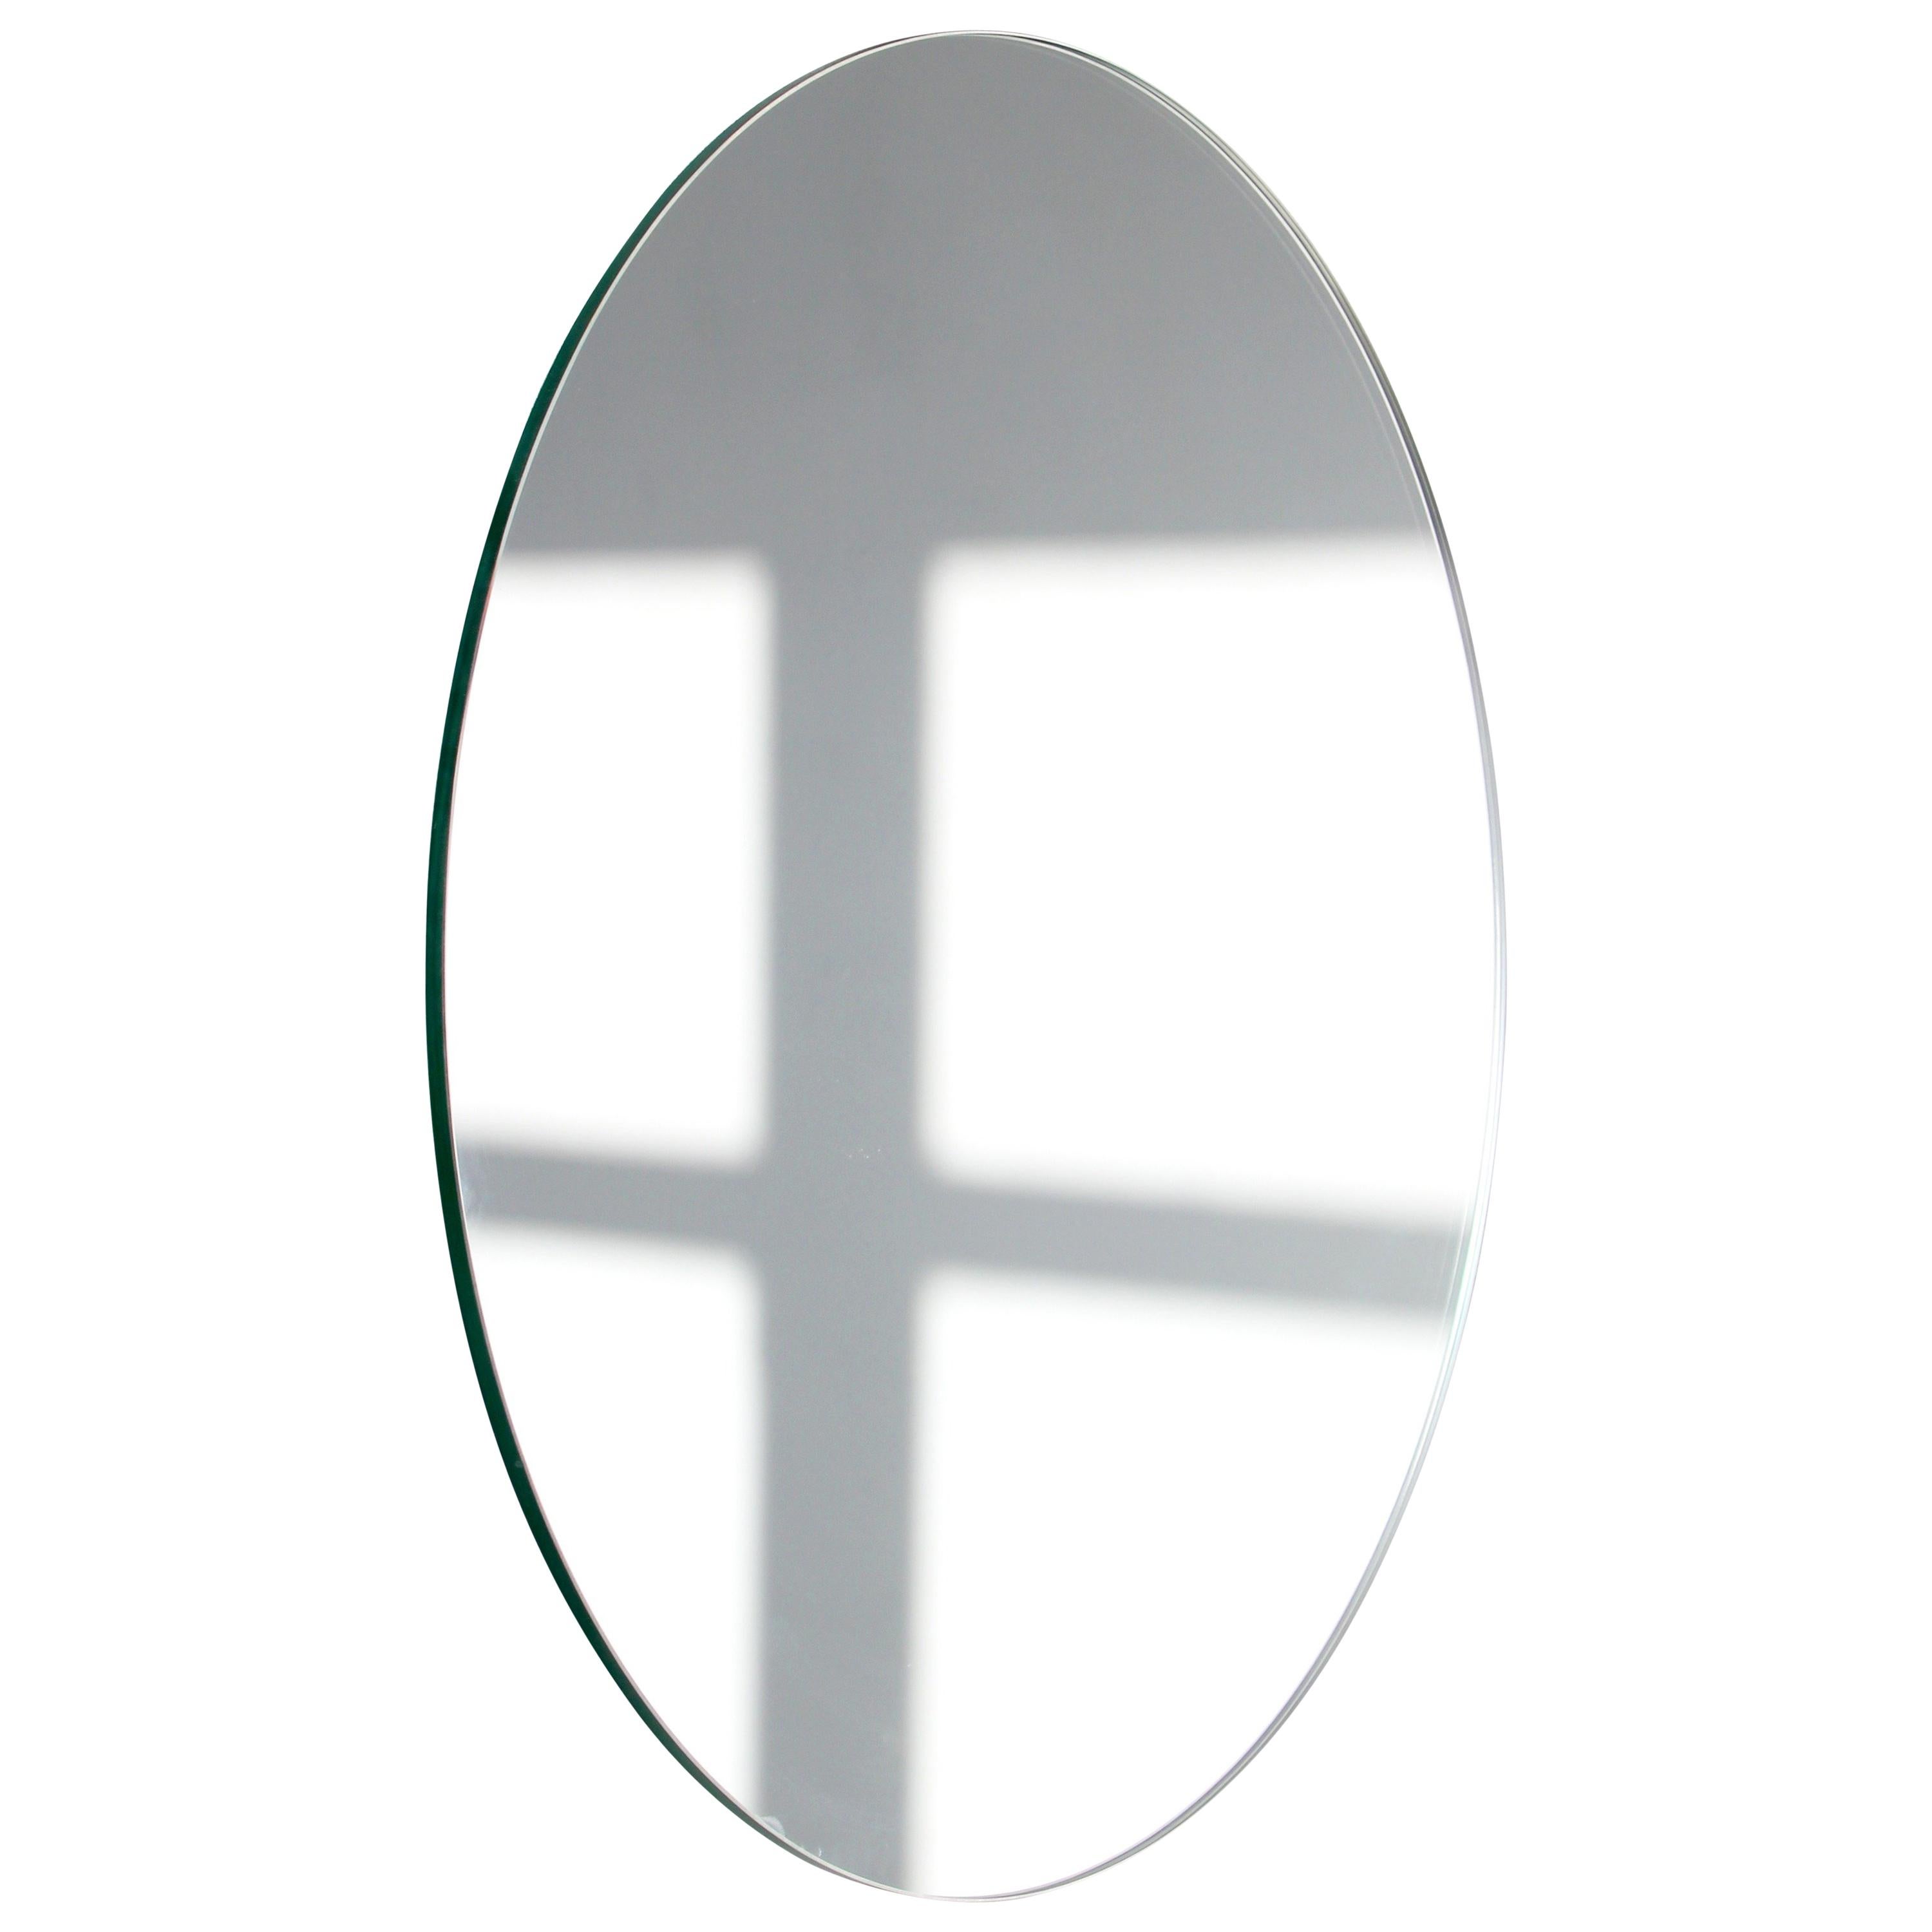 Orbis Round Minimalist Frameless Mirror Floating Effect, Small For Sale